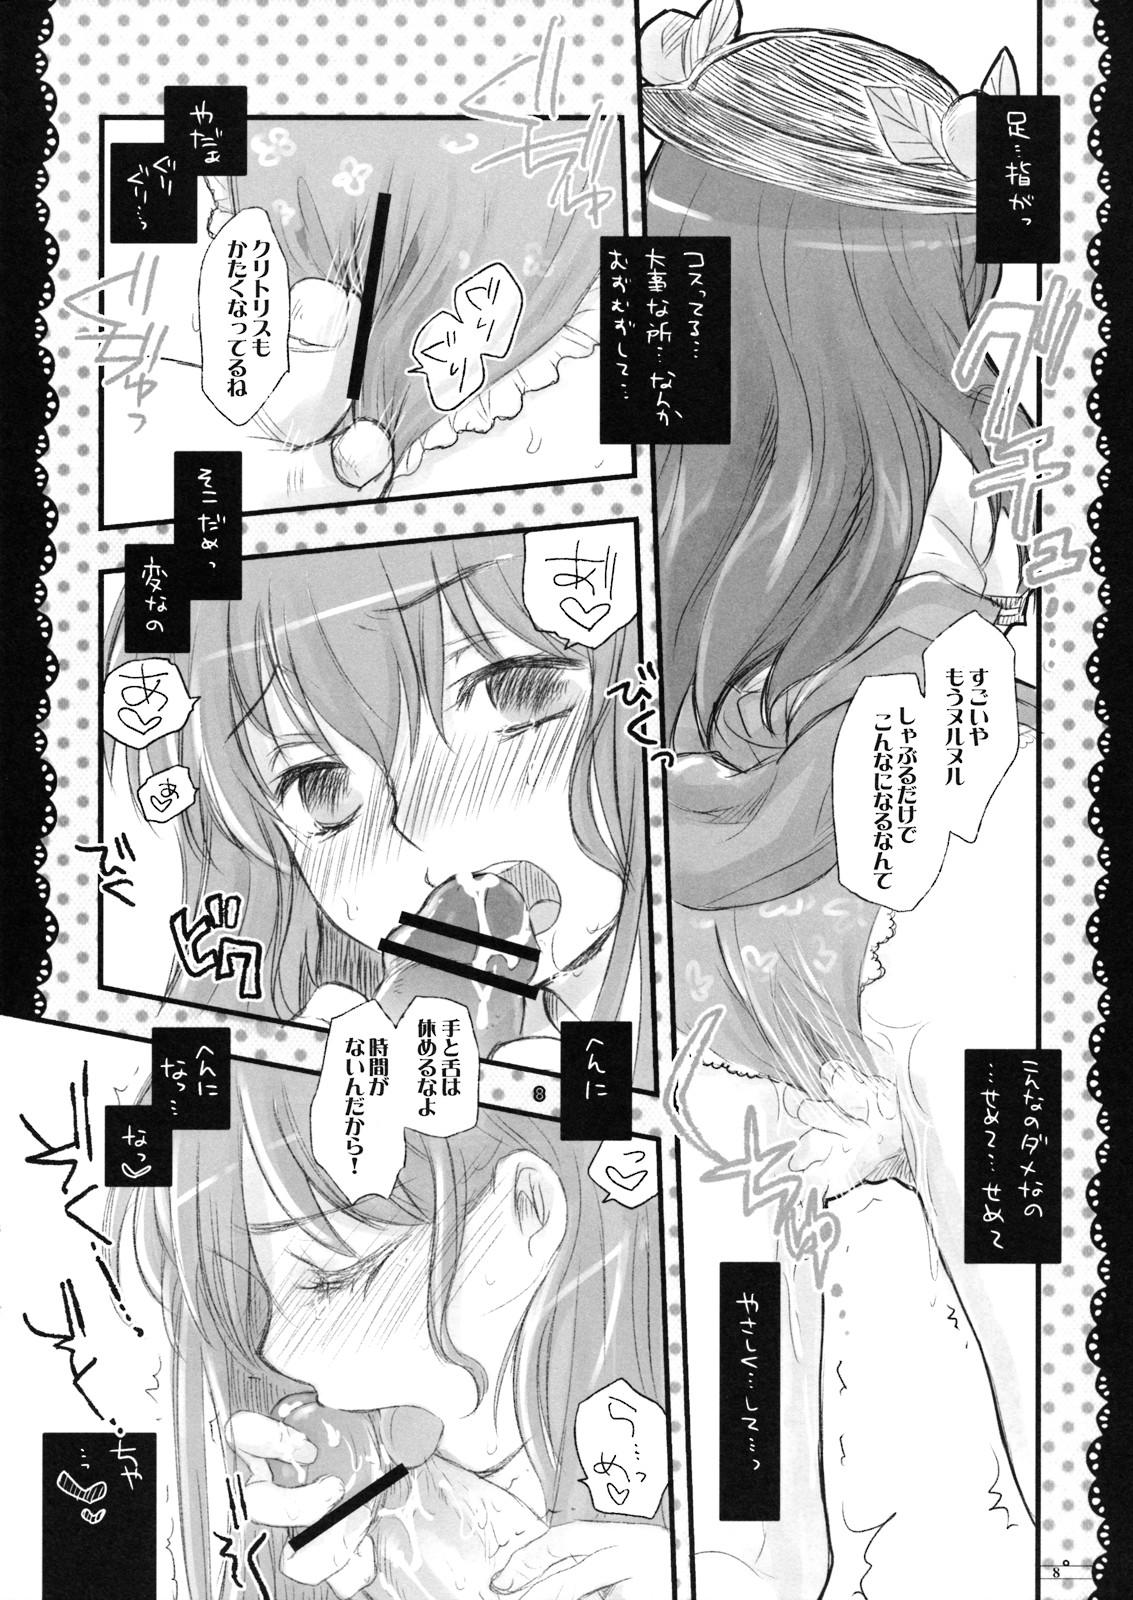 With Tenshi-san no Hon. - Touhou project Soloboy - Page 7